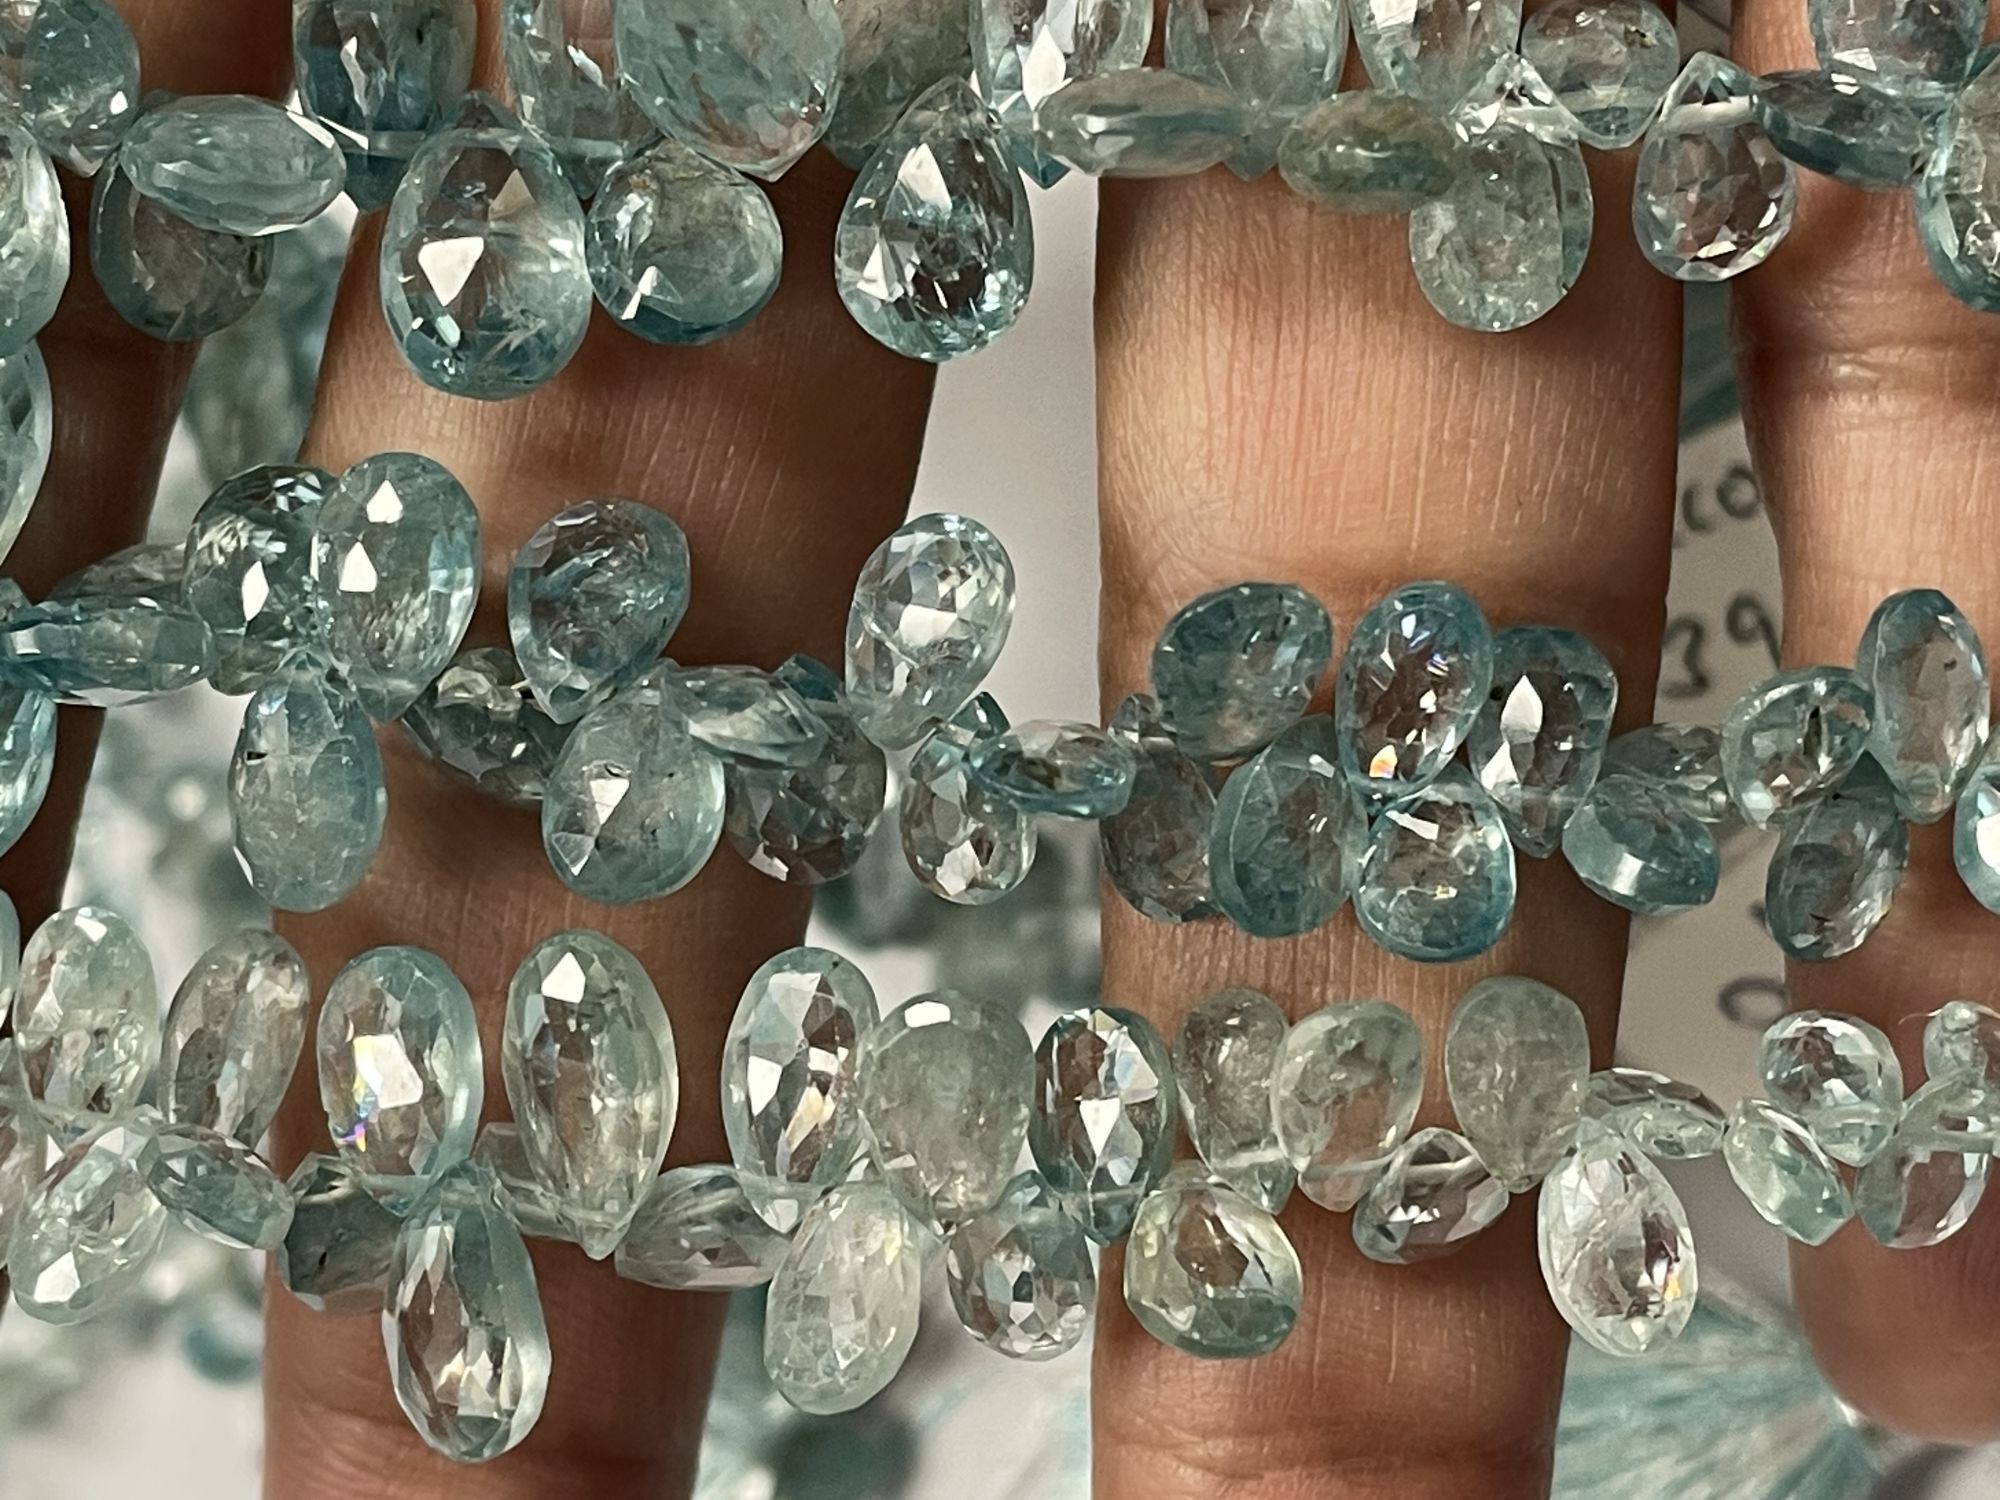 Blue Zircon Pear Faceted